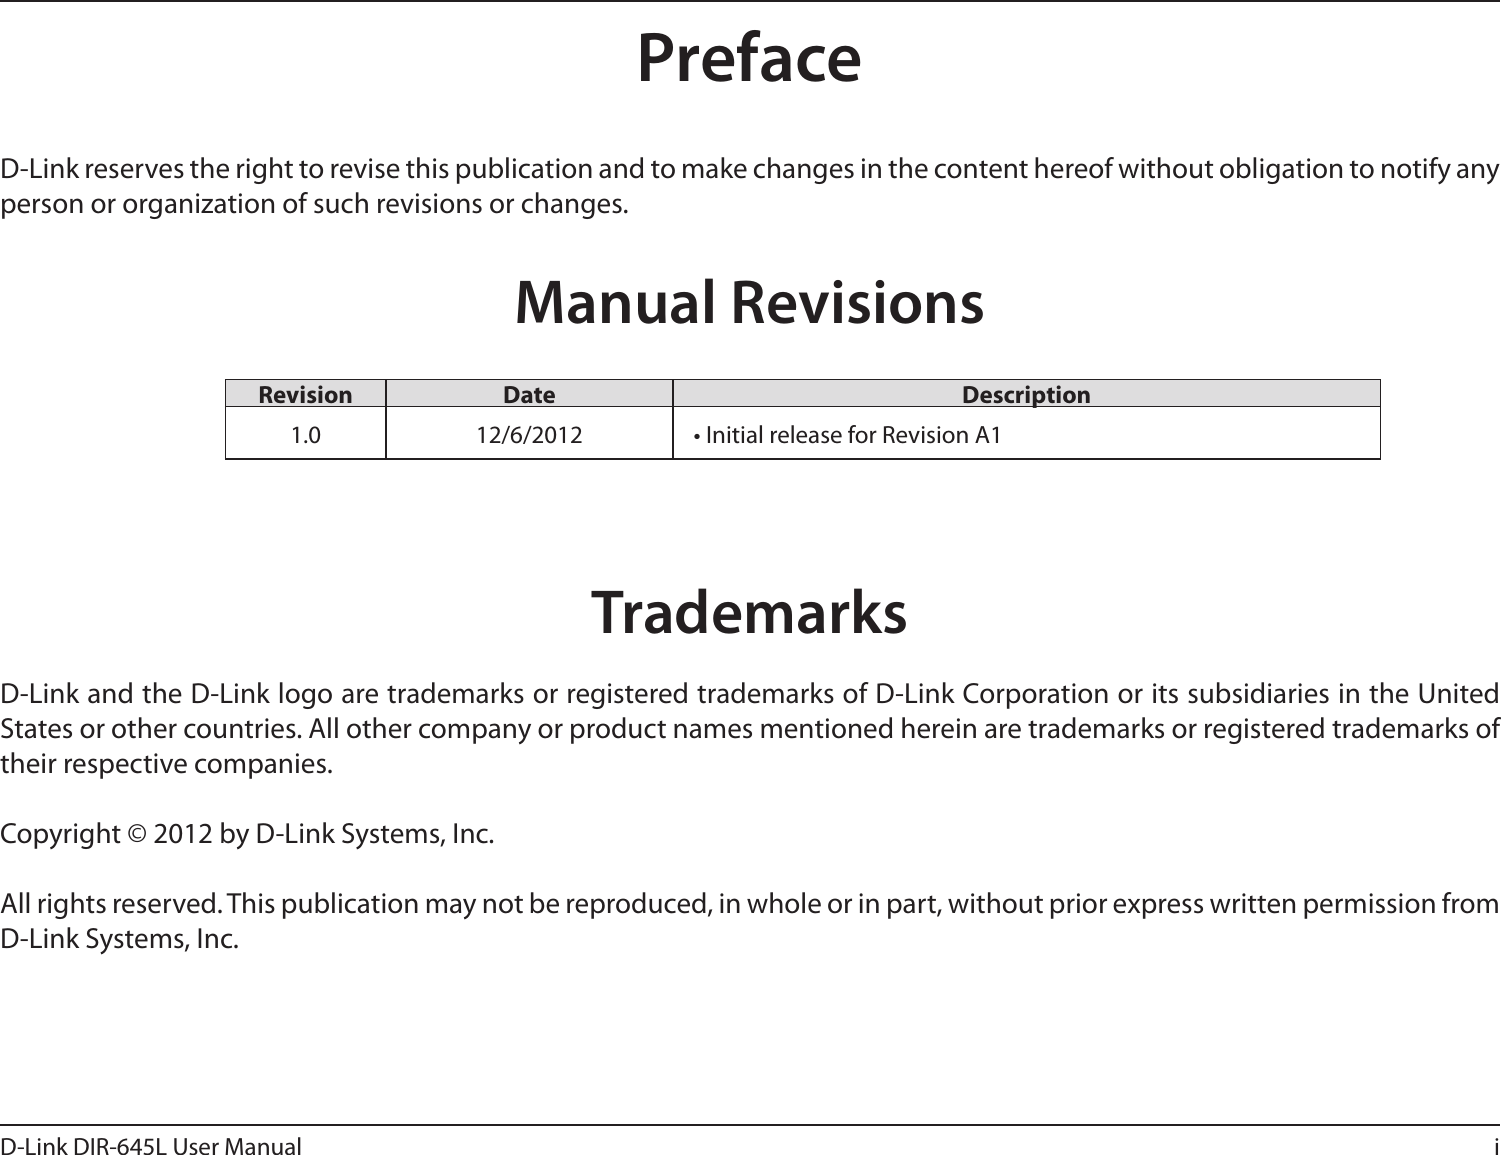 iD-Link DIR-645L User ManualD-Link reserves the right to revise this publication and to make changes in the content hereof without obligation to notify any person or organization of such revisions or changes.Manual RevisionsTrademarksD-Link and the D-Link logo are trademarks or registered trademarks of D-Link Corporation or its subsidiaries in the United States or other countries. All other company or product names mentioned herein are trademarks or registered trademarks of their respective companies.Copyright © 2012 by D-Link Systems, Inc.All rights reserved. This publication may not be reproduced, in whole or in part, without prior express written permission from D-Link Systems, Inc.Revision Date Description1.0 12/6/2012 • Initial release for Revision A1Preface